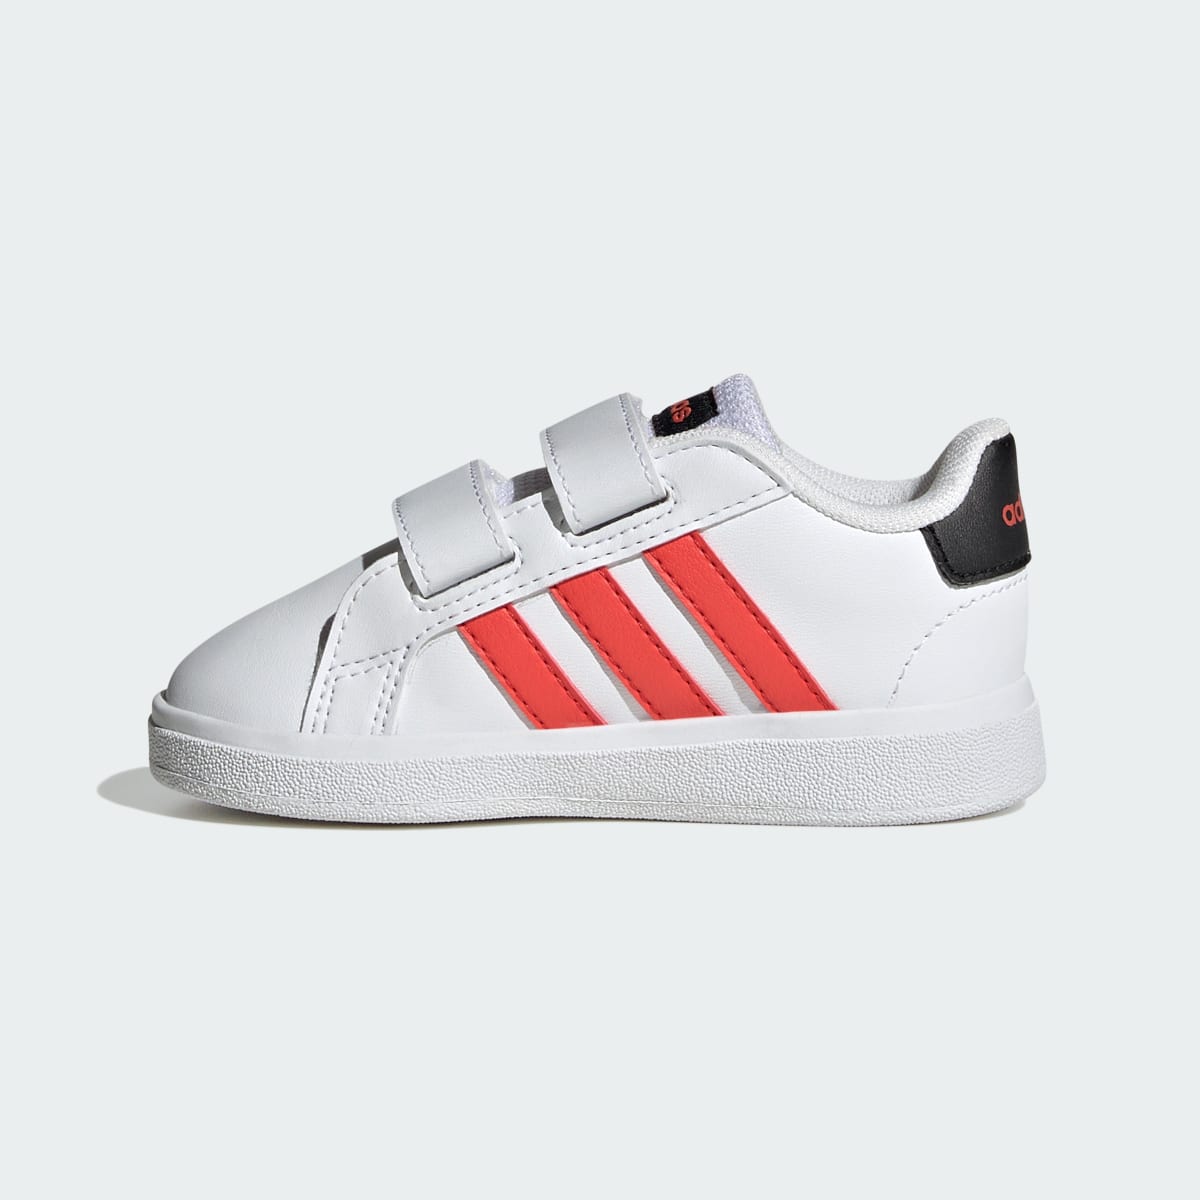 Adidas Grand Court Lifestyle Hook and Loop Shoes. 7